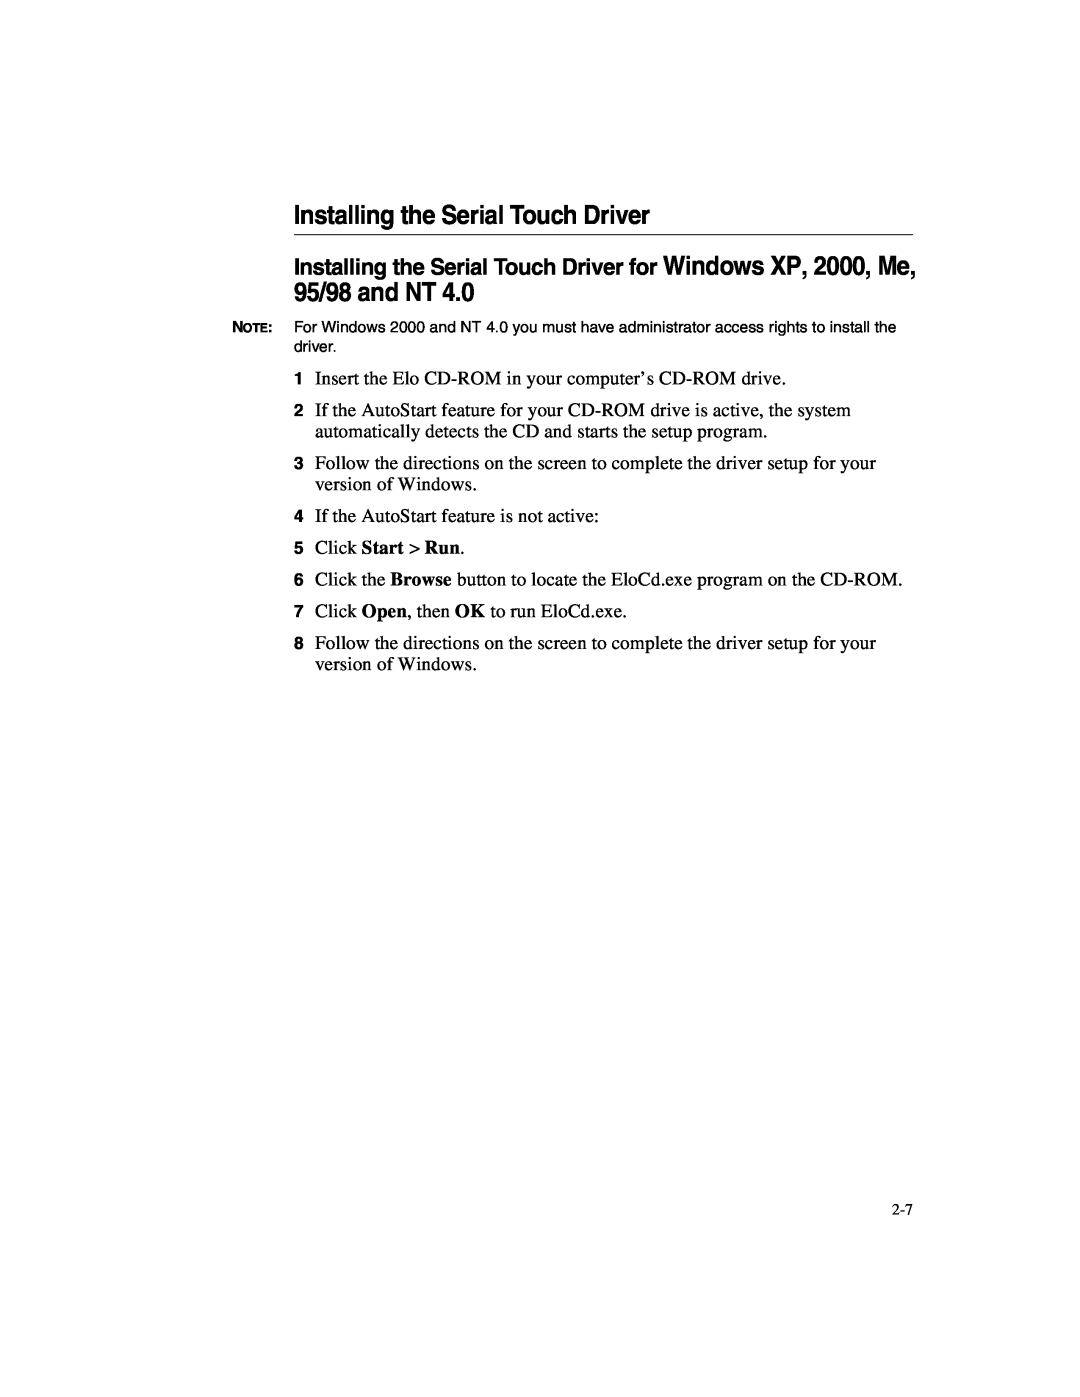 Elo TouchSystems 1247L manual Installing the Serial Touch Driver, 95/98 and NT 